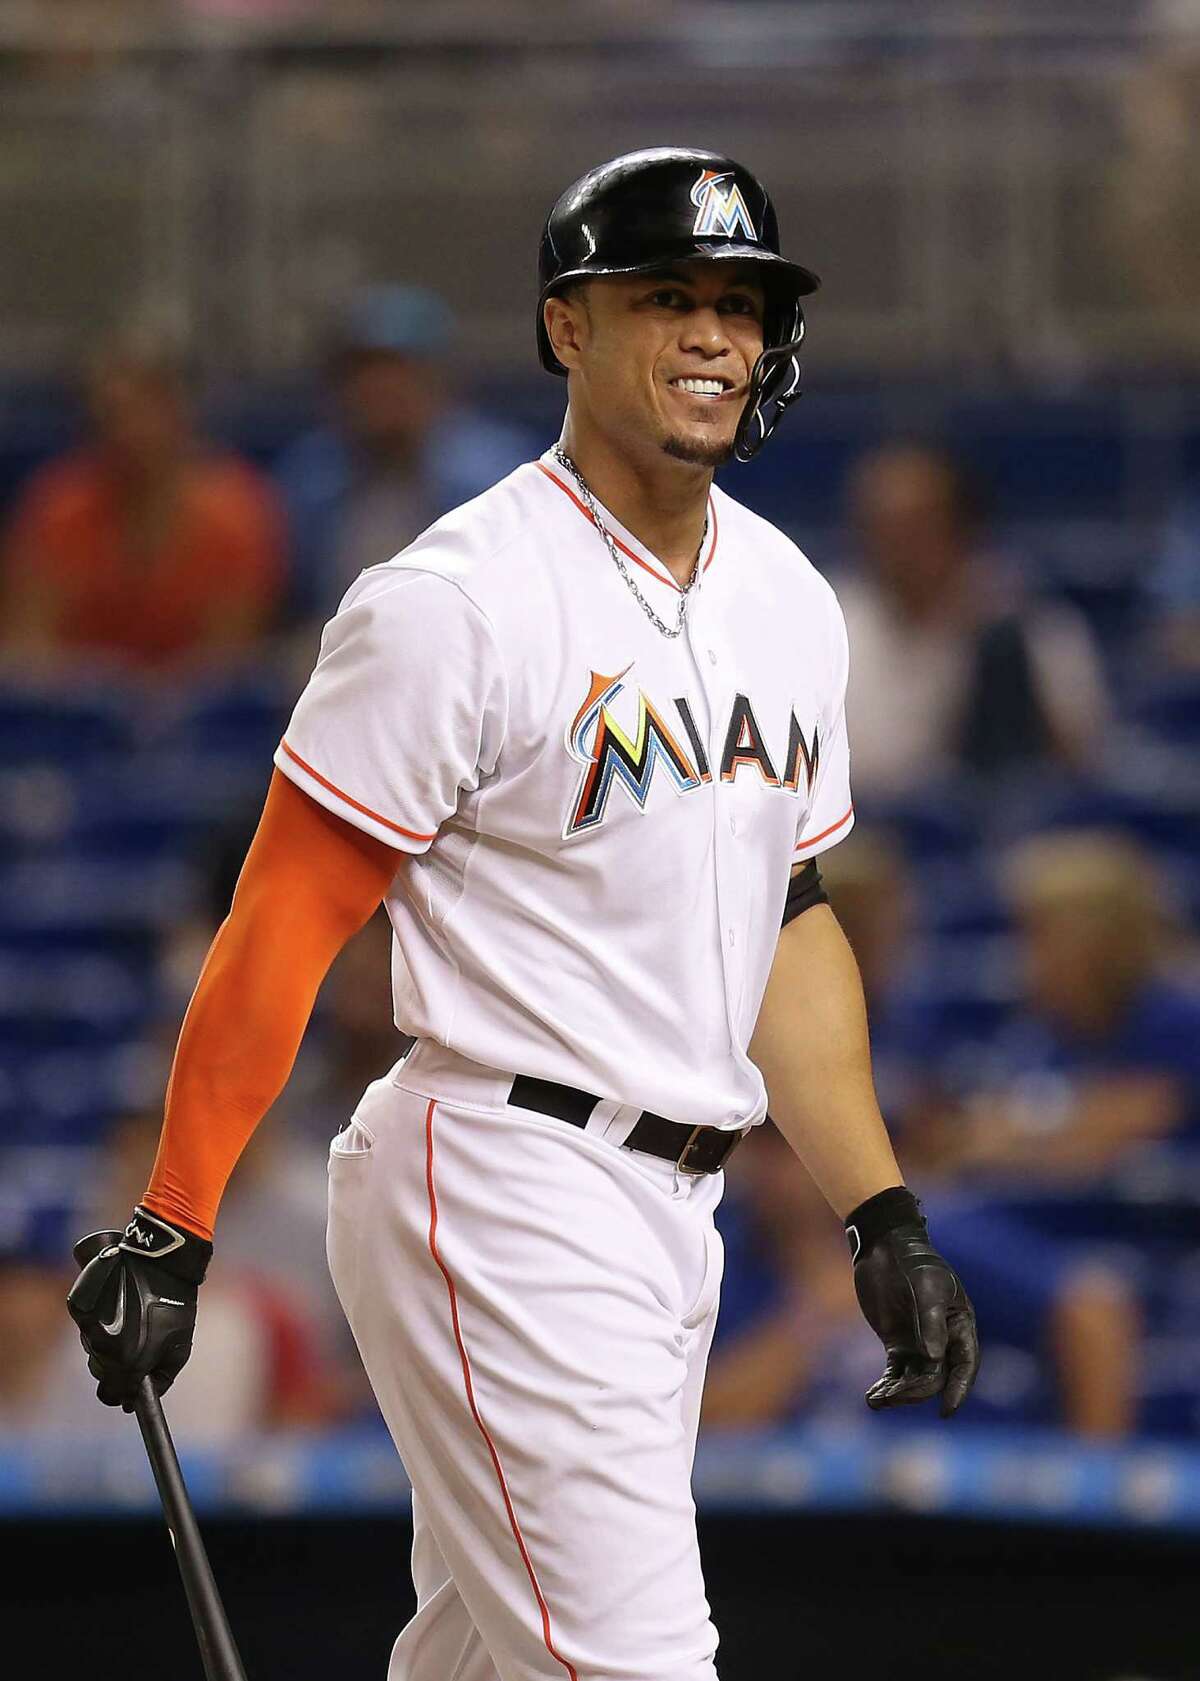 Stanton sidelined four to six weeks